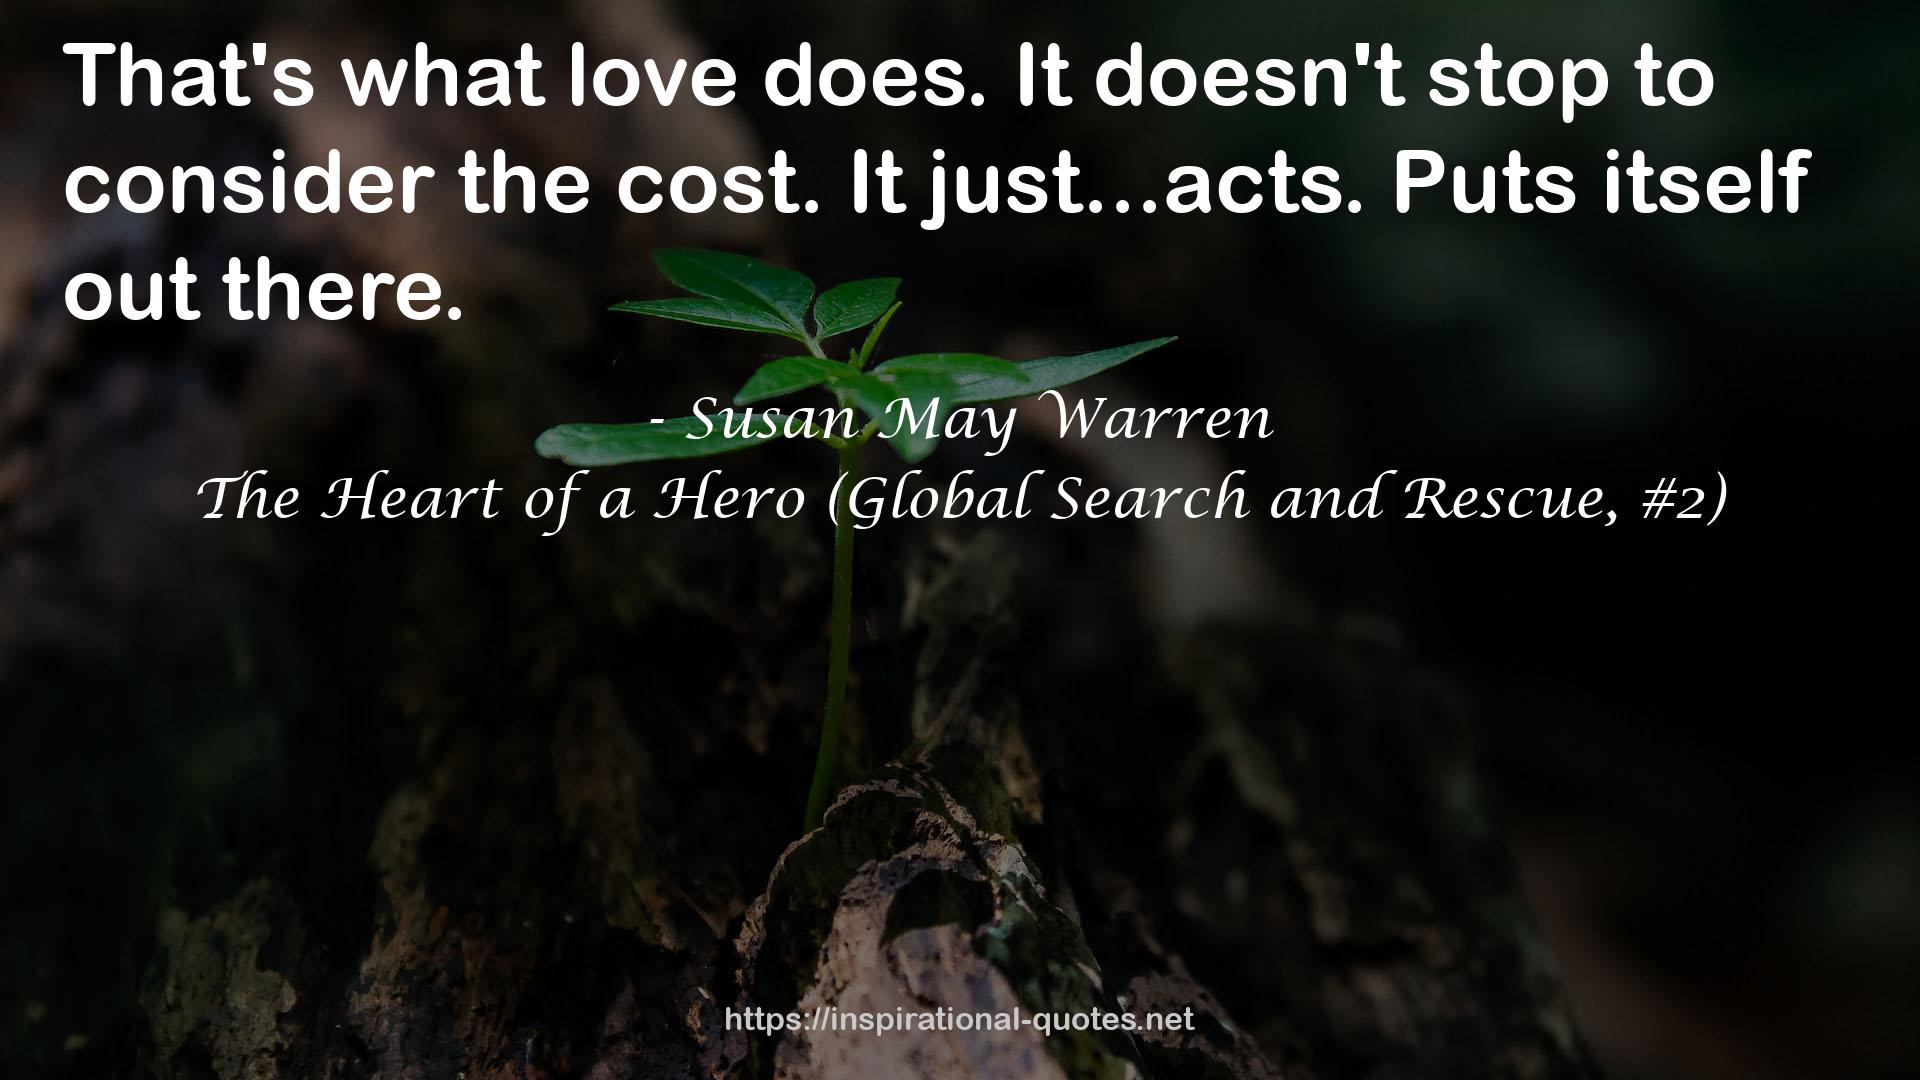 The Heart of a Hero (Global Search and Rescue, #2) QUOTES